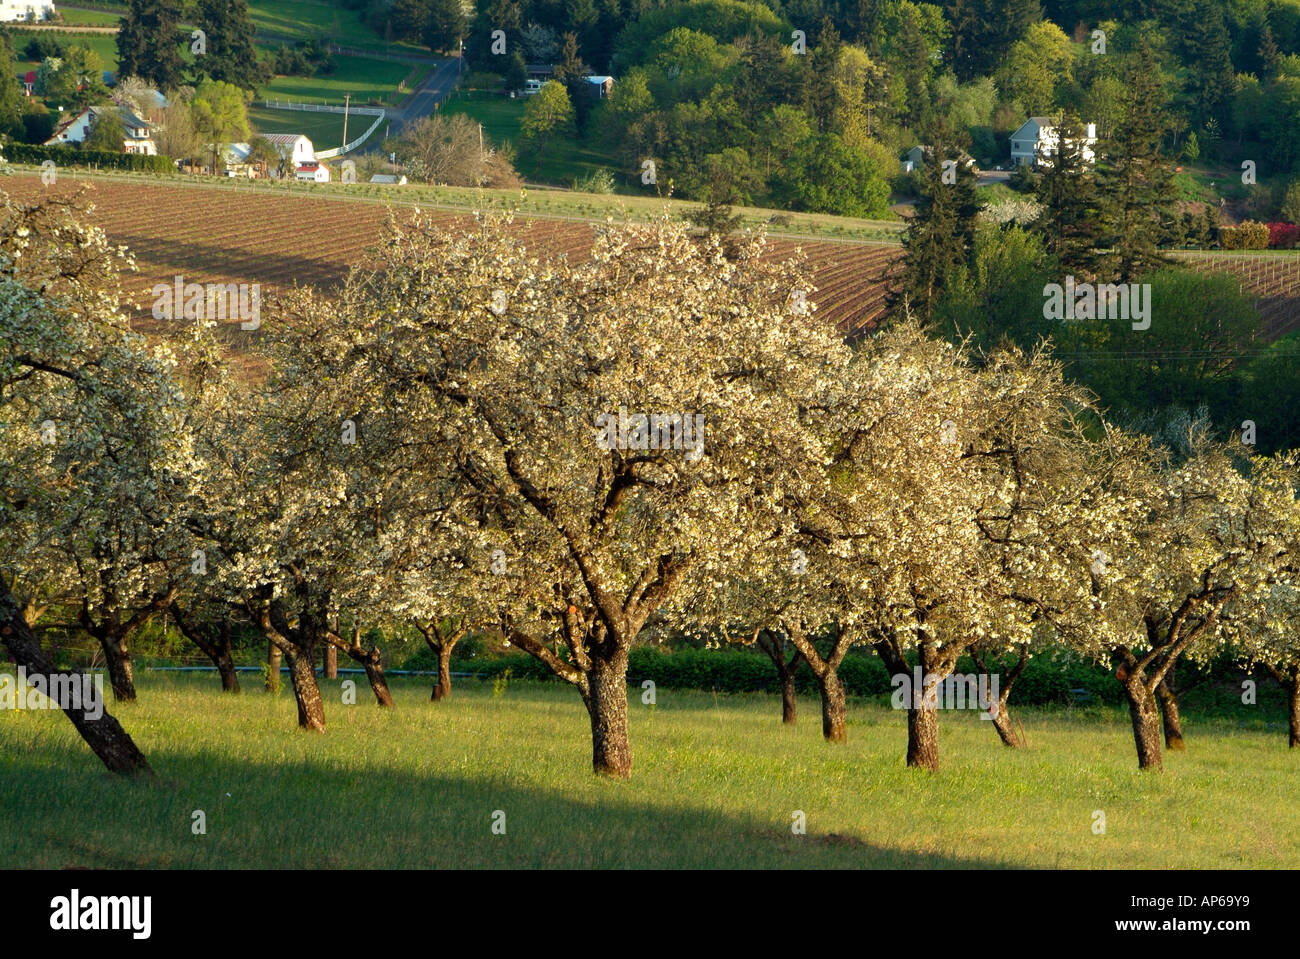 Orchard, and Old Parrett Mtn. Road snaking through vineyard landscape behind, Willamette Valley, Oregon Stock Photo